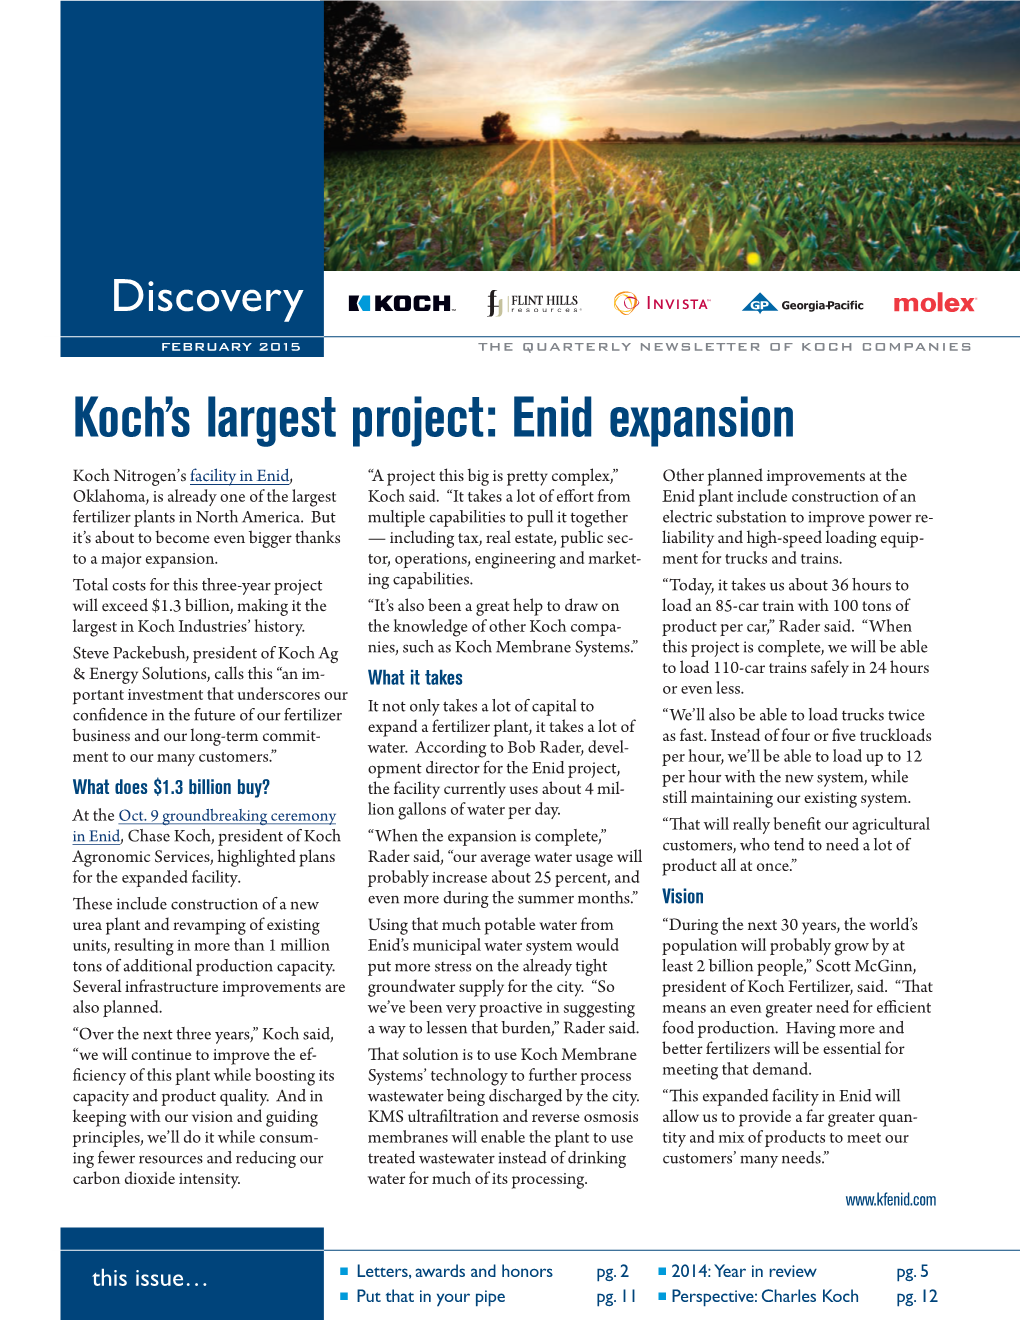 Koch's Largest Project: Enid Expansion